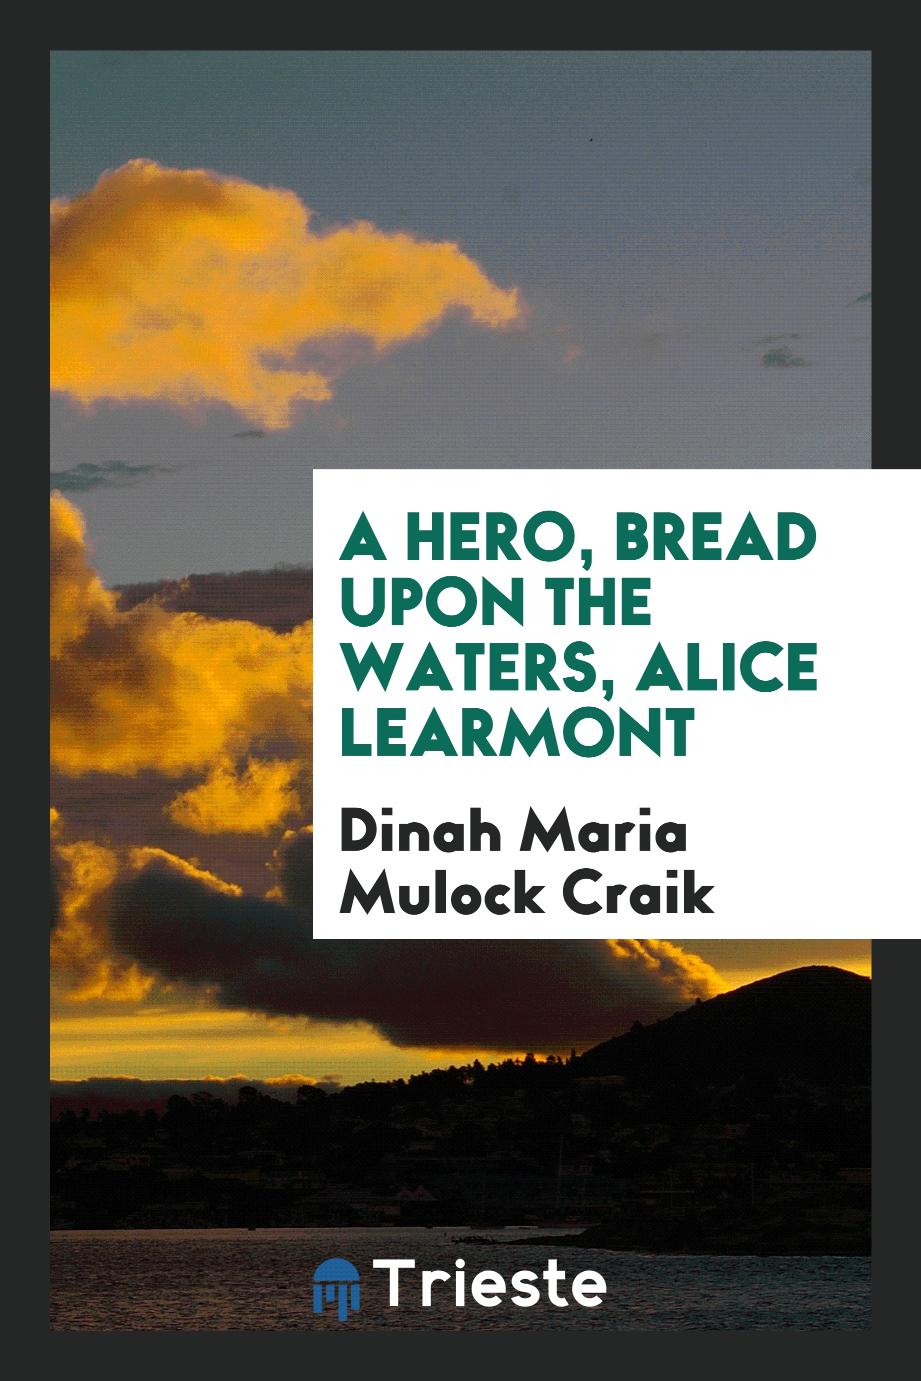 A hero, Bread upon the waters, Alice Learmont